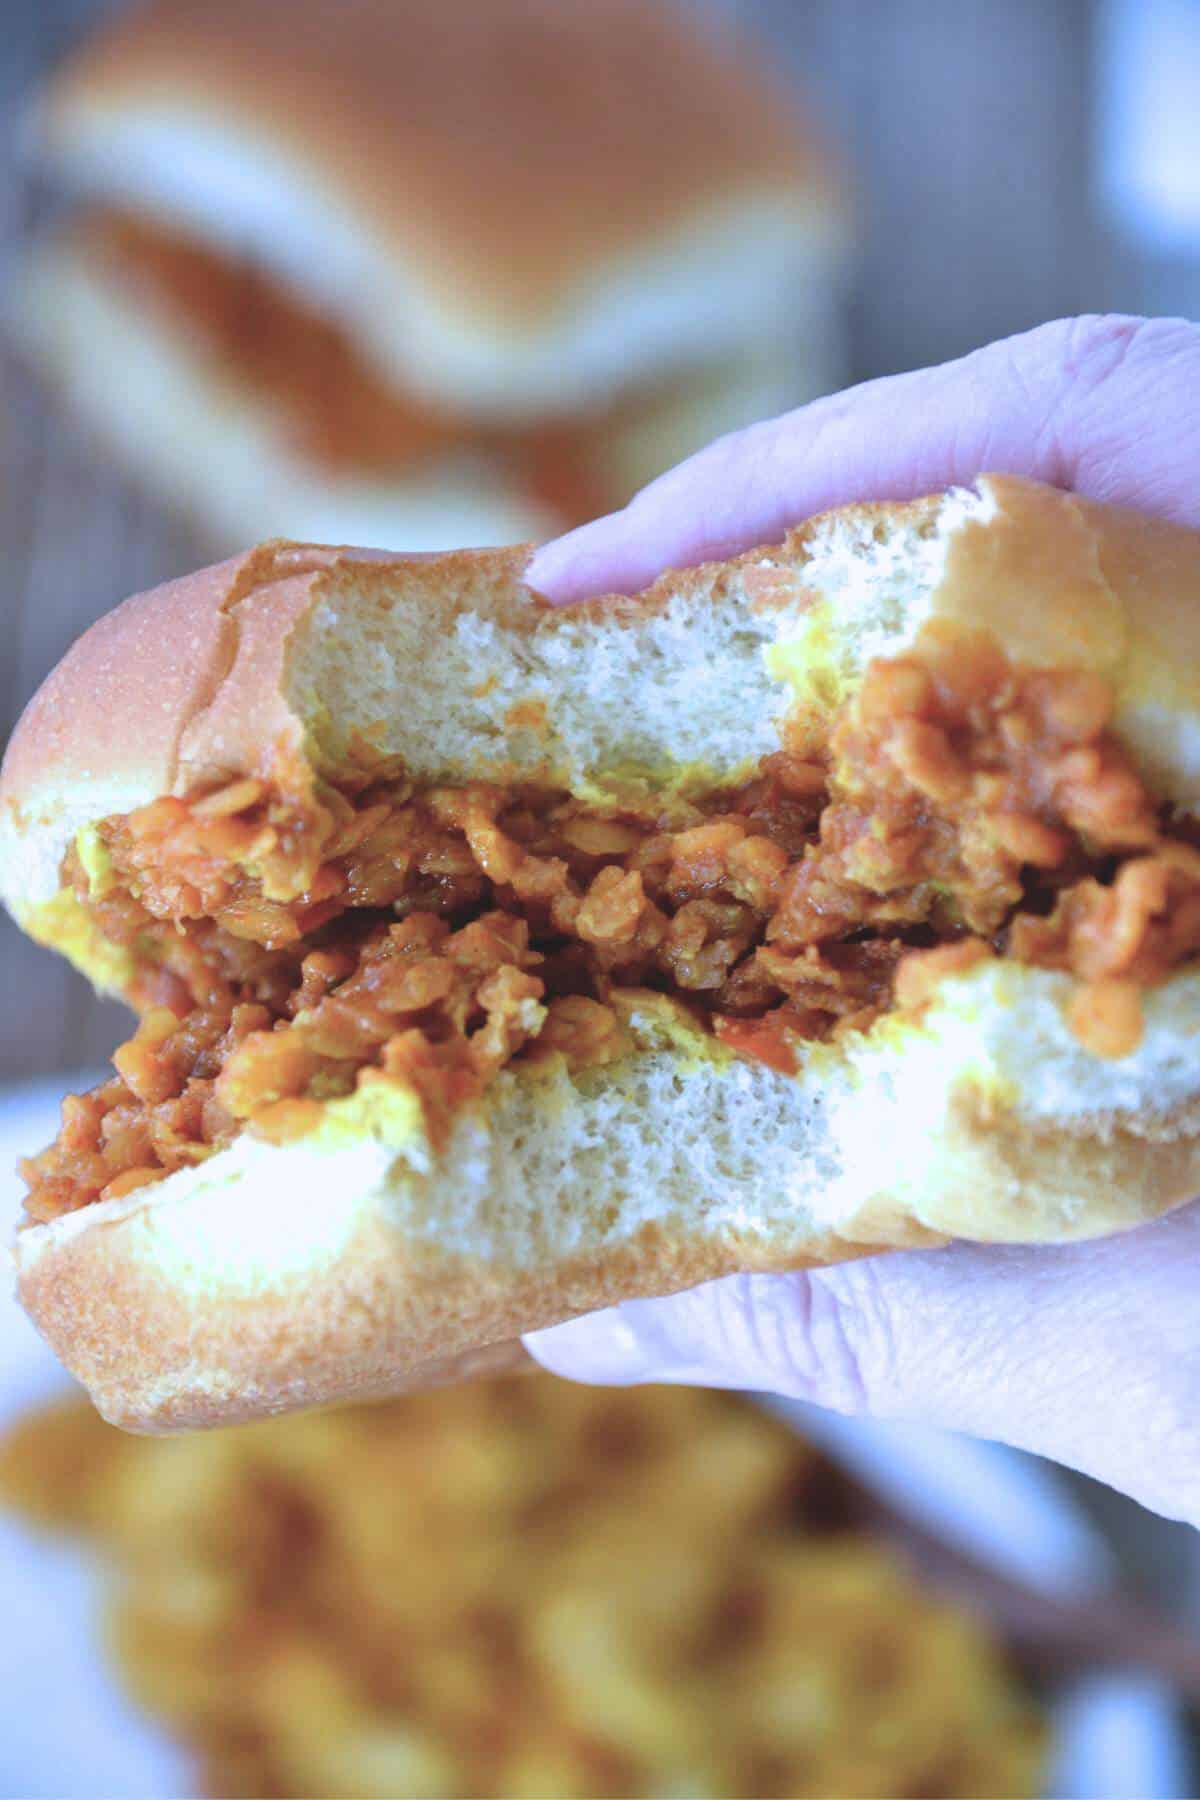 hand holding sloppy joe with bite out of sandwich.